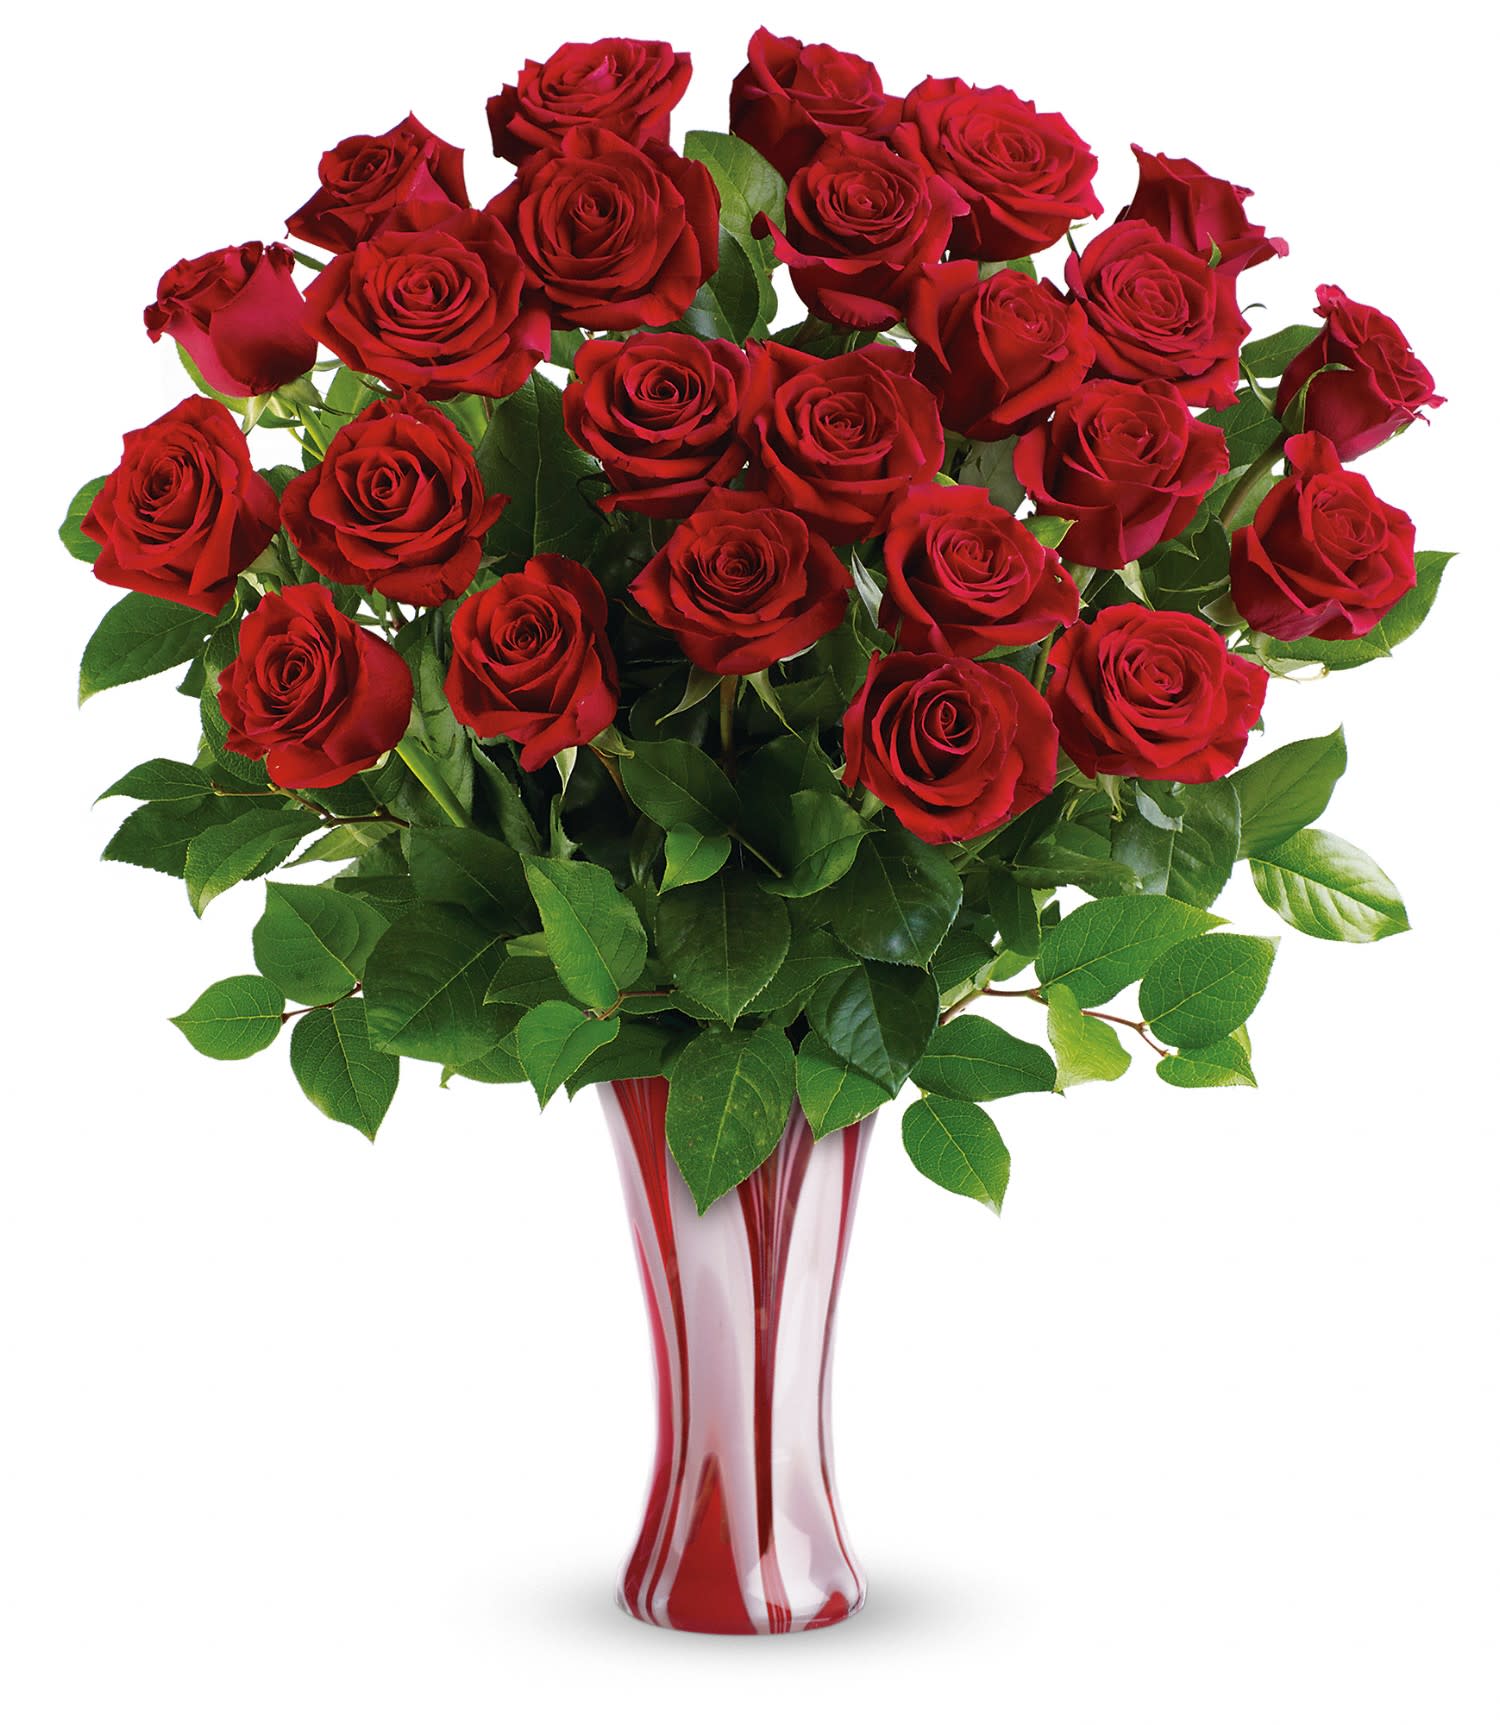 I Adore You Bouquet by Teleflora PM - The essence of romance! Make her swoon with one dozen radiant long stemmed red roses, hand-delivered in this singularly stunning art-glass vase. It's a dramatic expression of your endless love and adoration. 